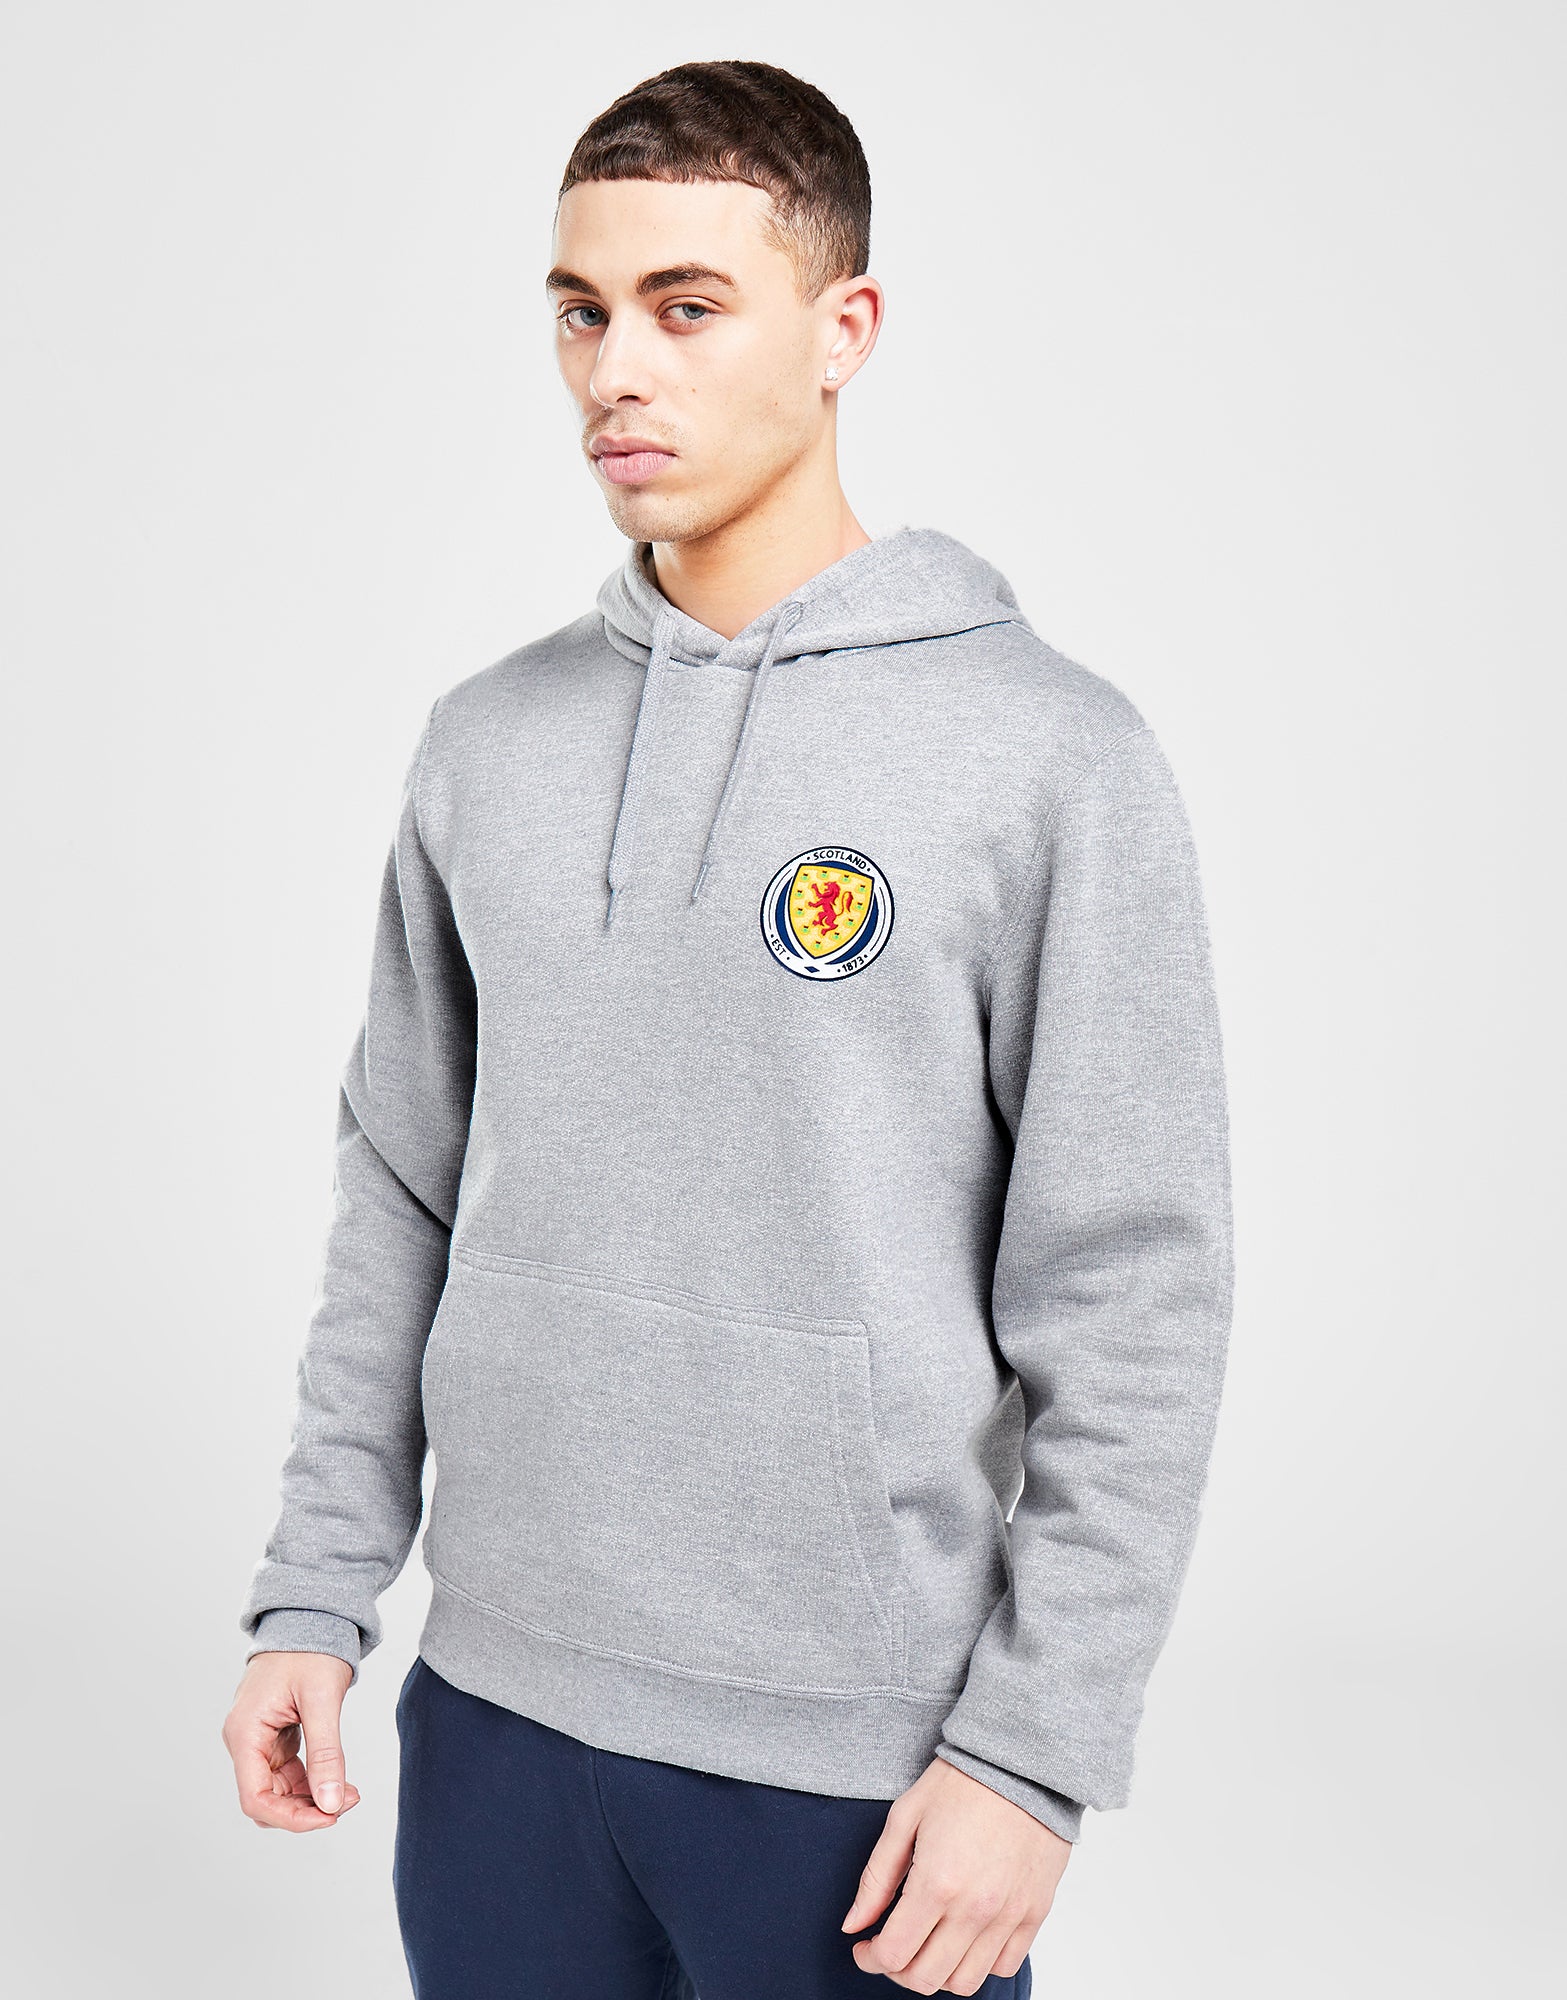 Official Team Scotland Crest Badge Hoodie - Grey - The World Football Store